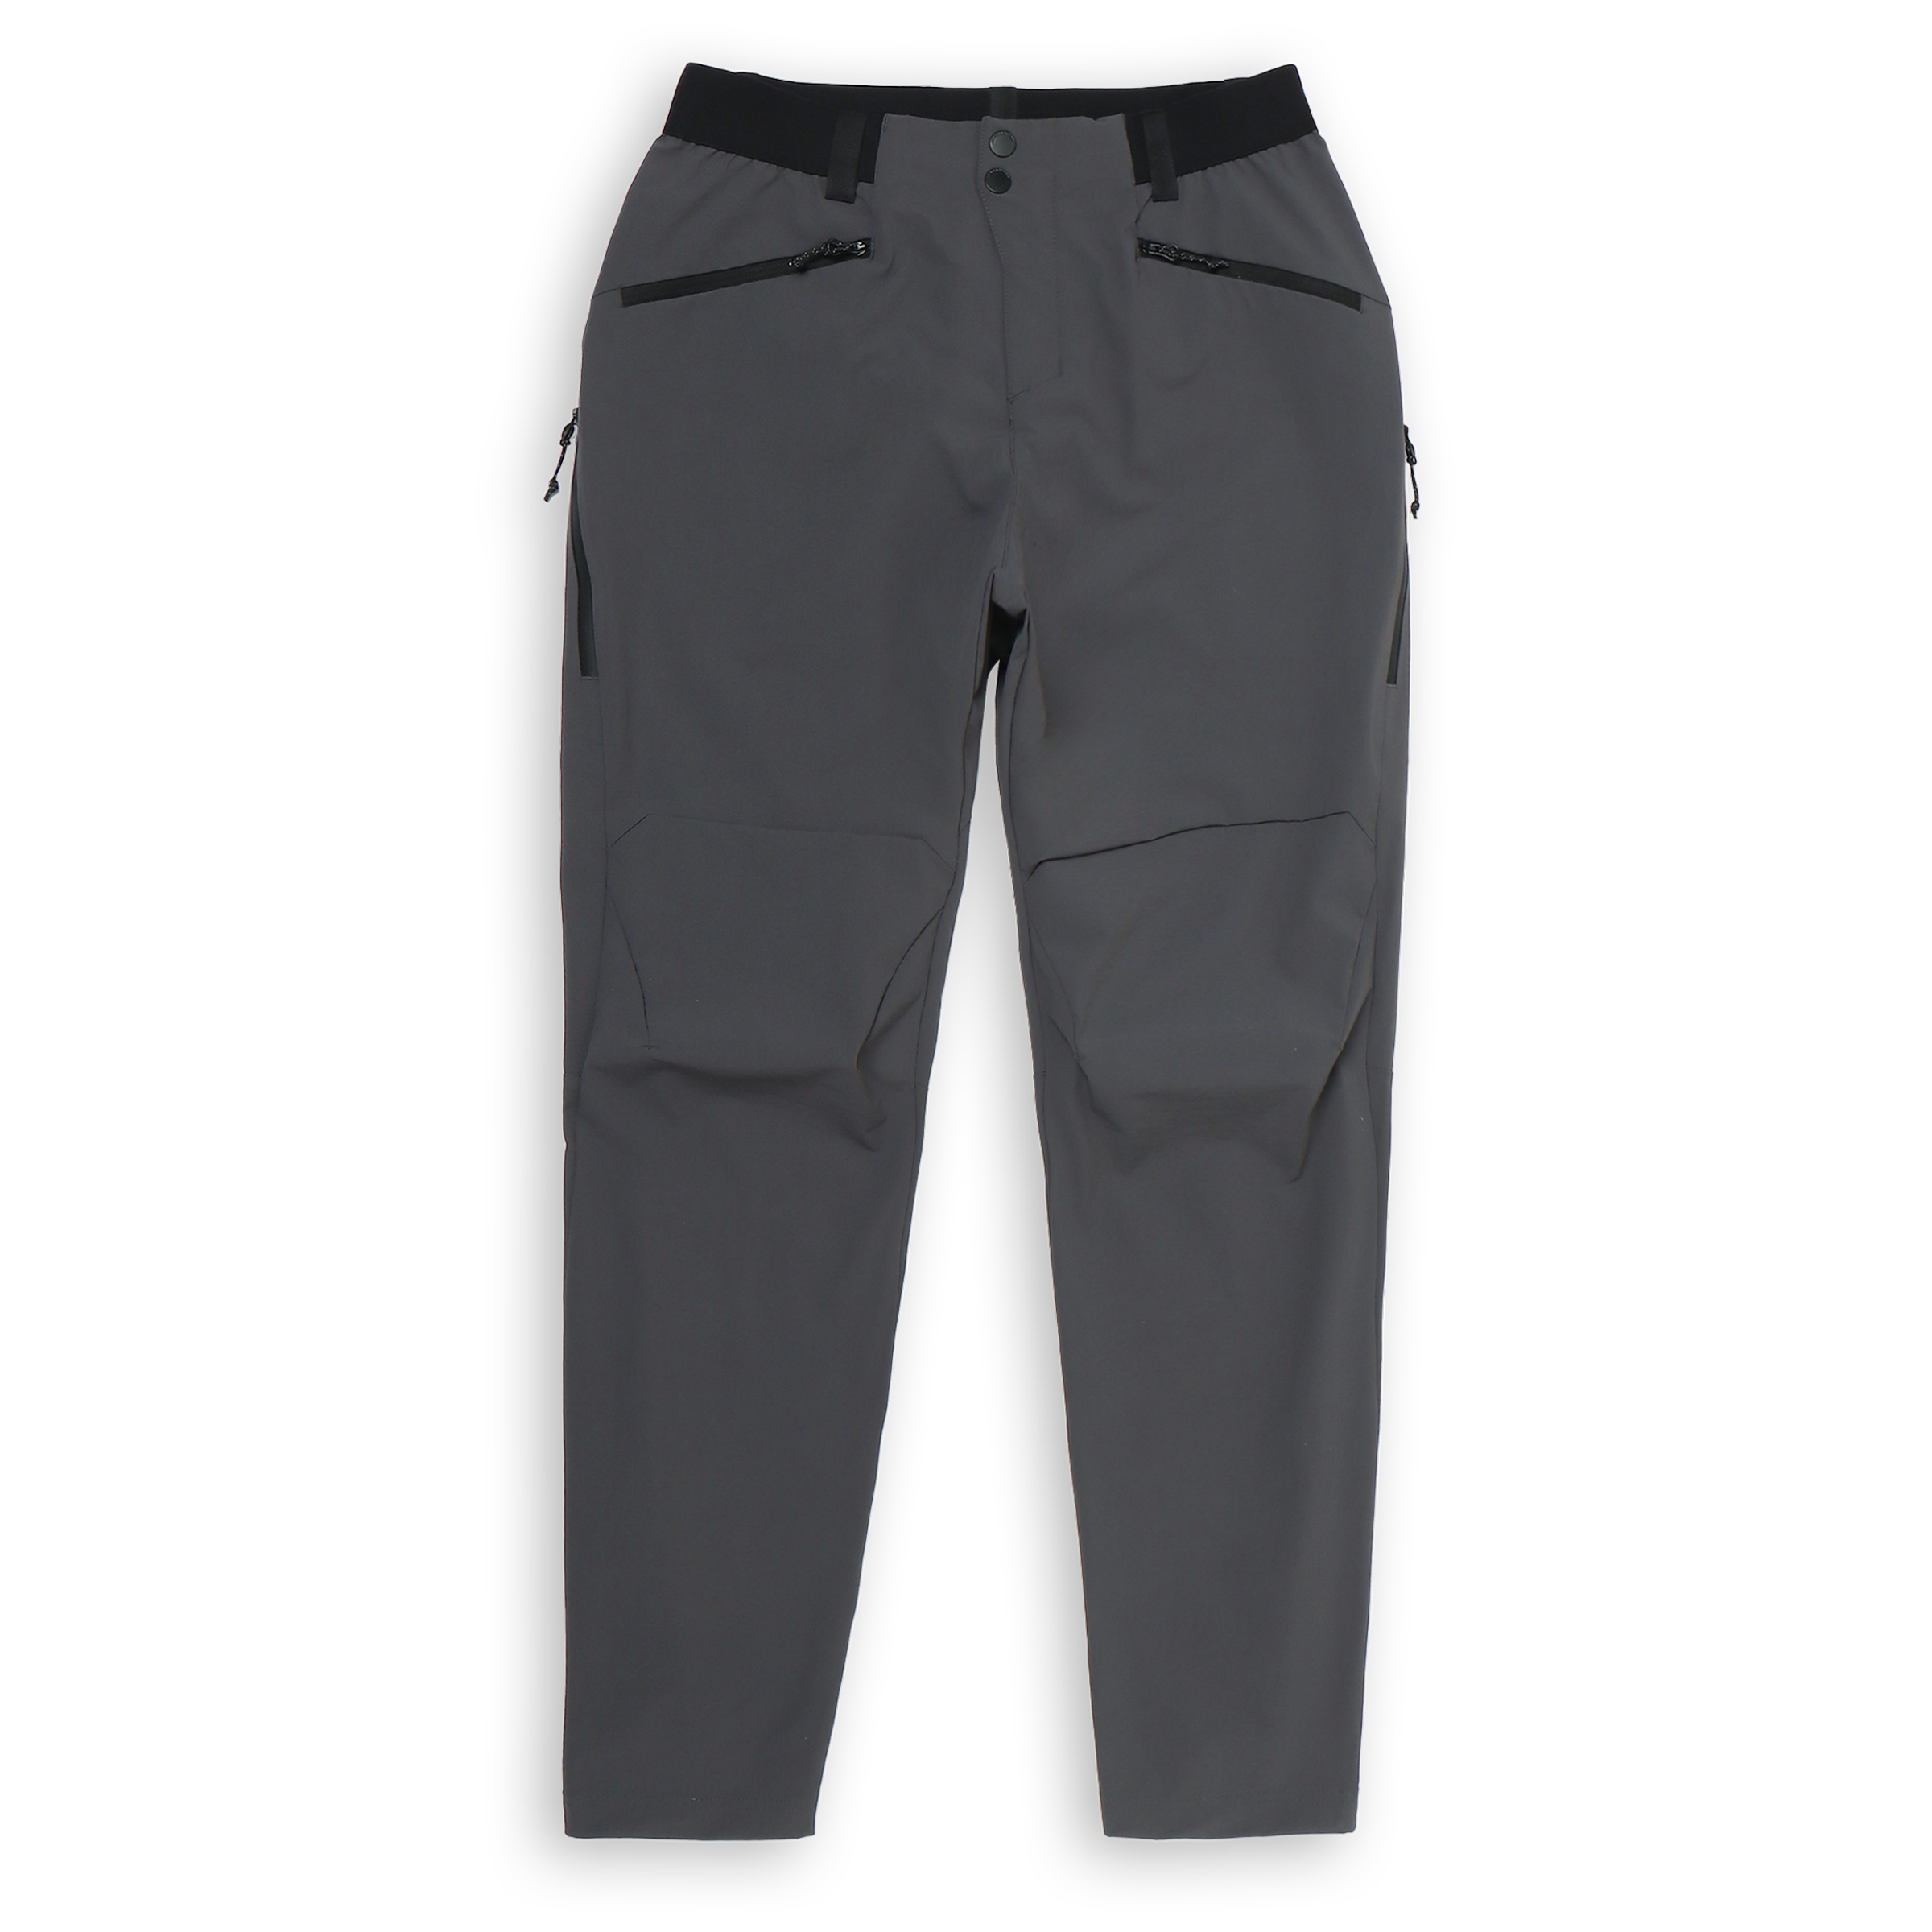 Trail Pant Coal front with zipper front pockets, elastic waistband with belt loop, and perforated side vent pockets.